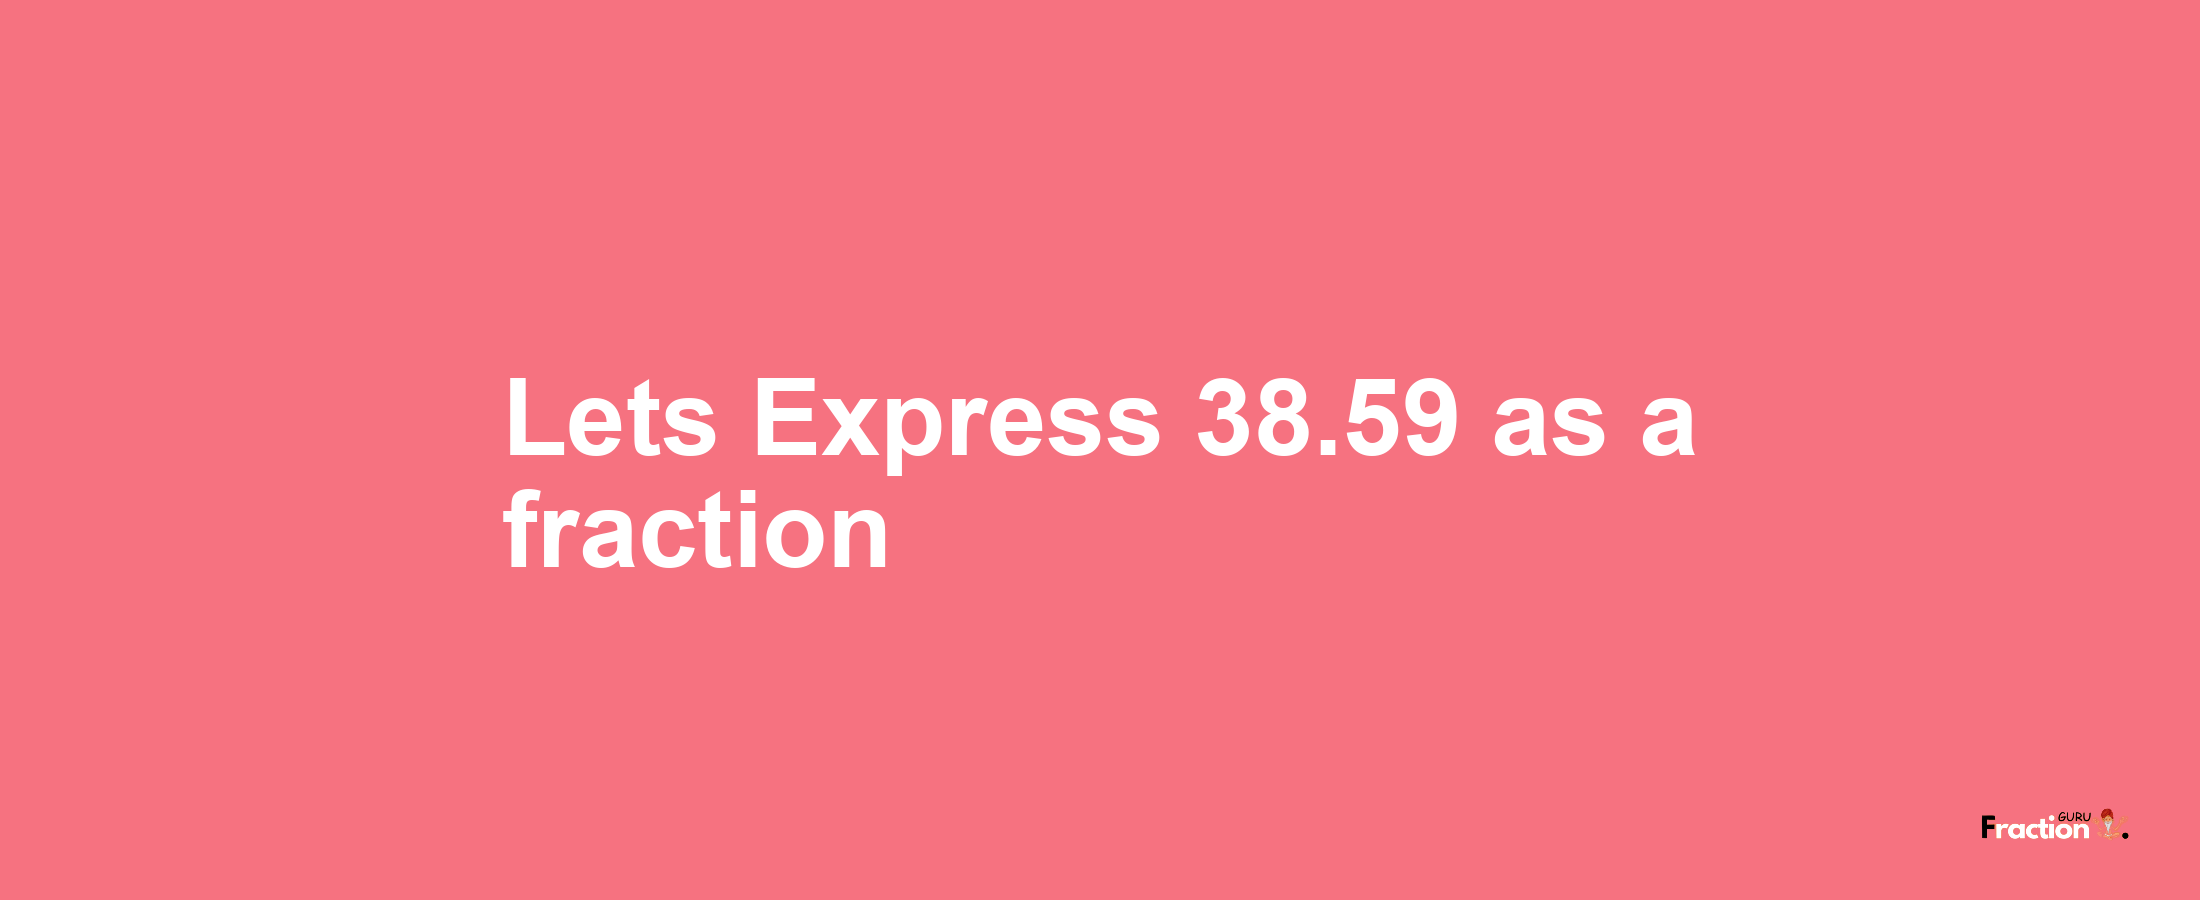 Lets Express 38.59 as afraction